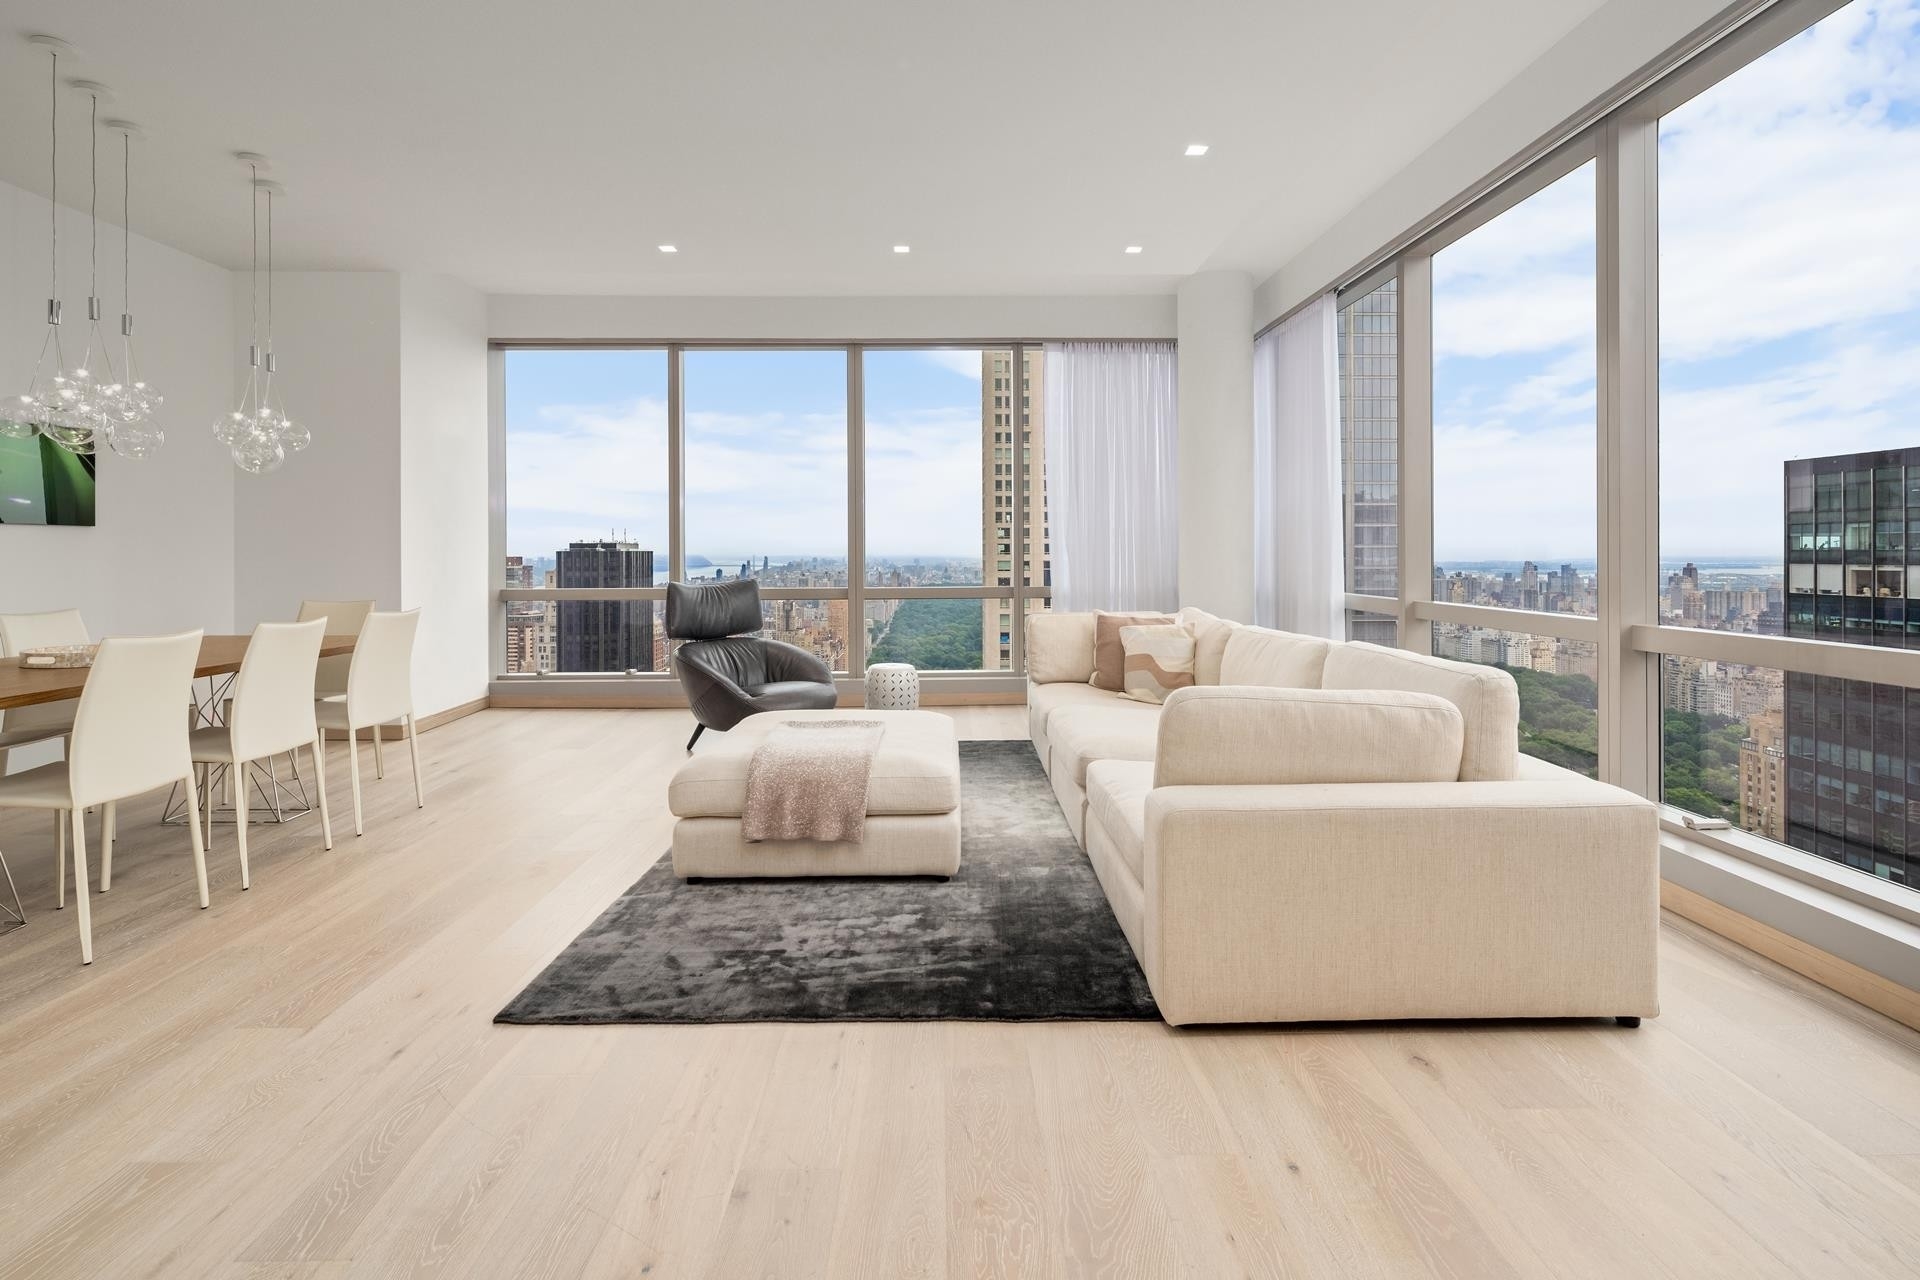 Property at The Park Imperial, 230 W 56TH ST, 66A New York